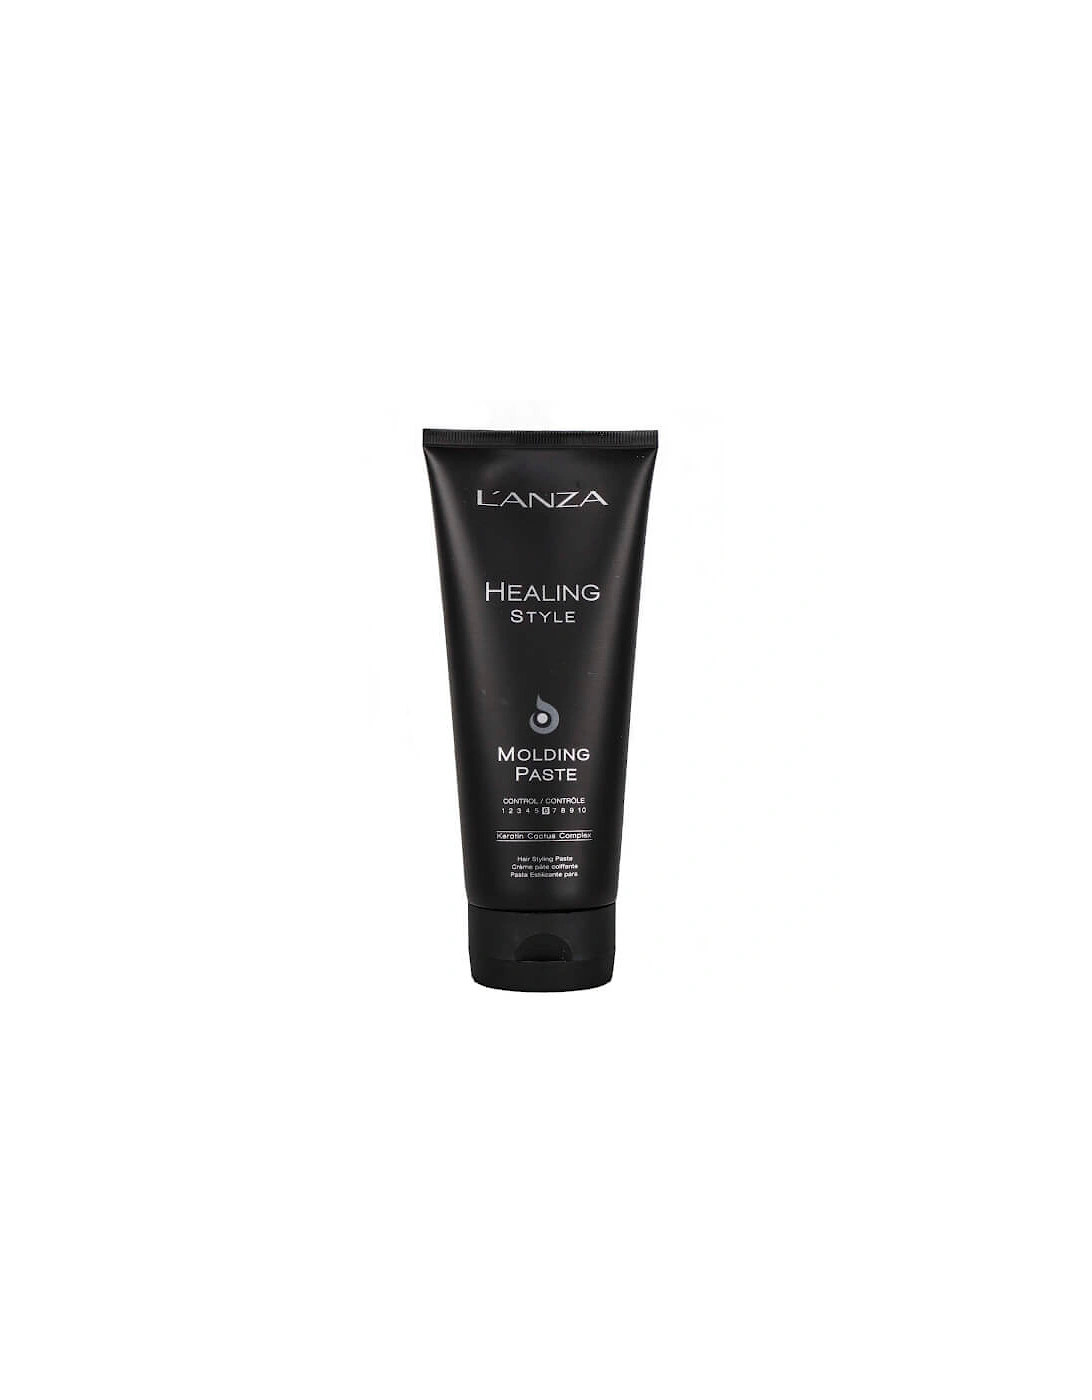 Healing Style Molding Paste (175ml) - L'ANZA, 2 of 1